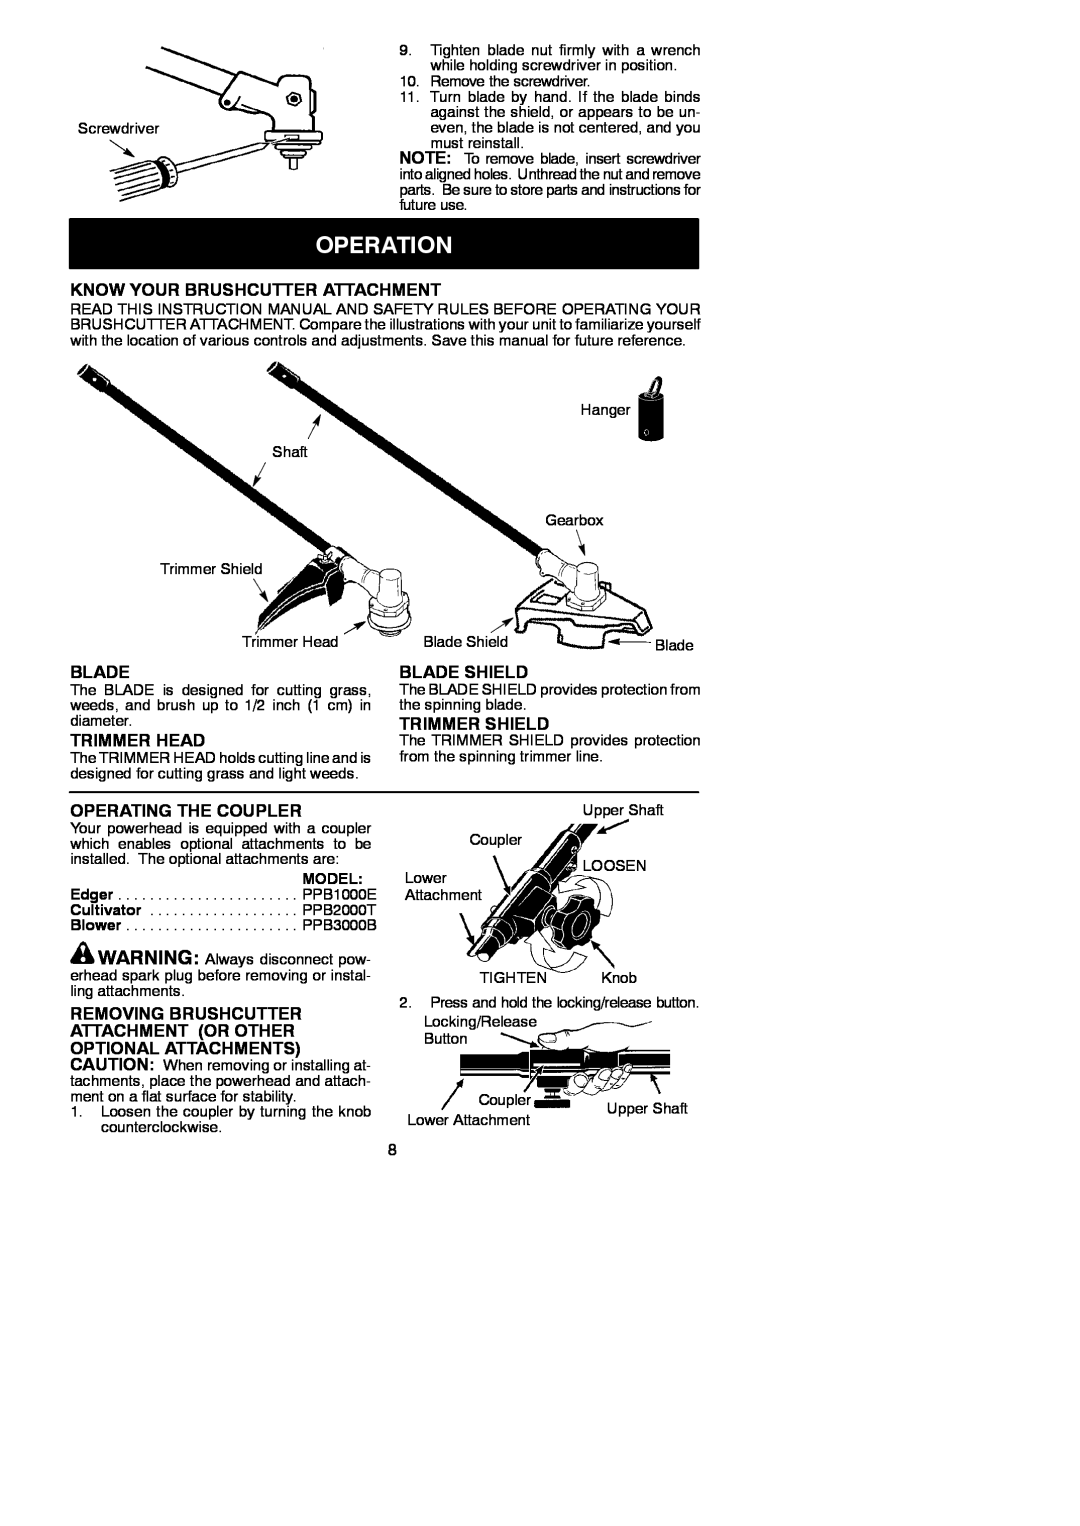 Poulan 530164264 Operation, Know Your Brushcutter Attachment, Blade Shield, Trimmer Shield, Trimmer Head, Model 